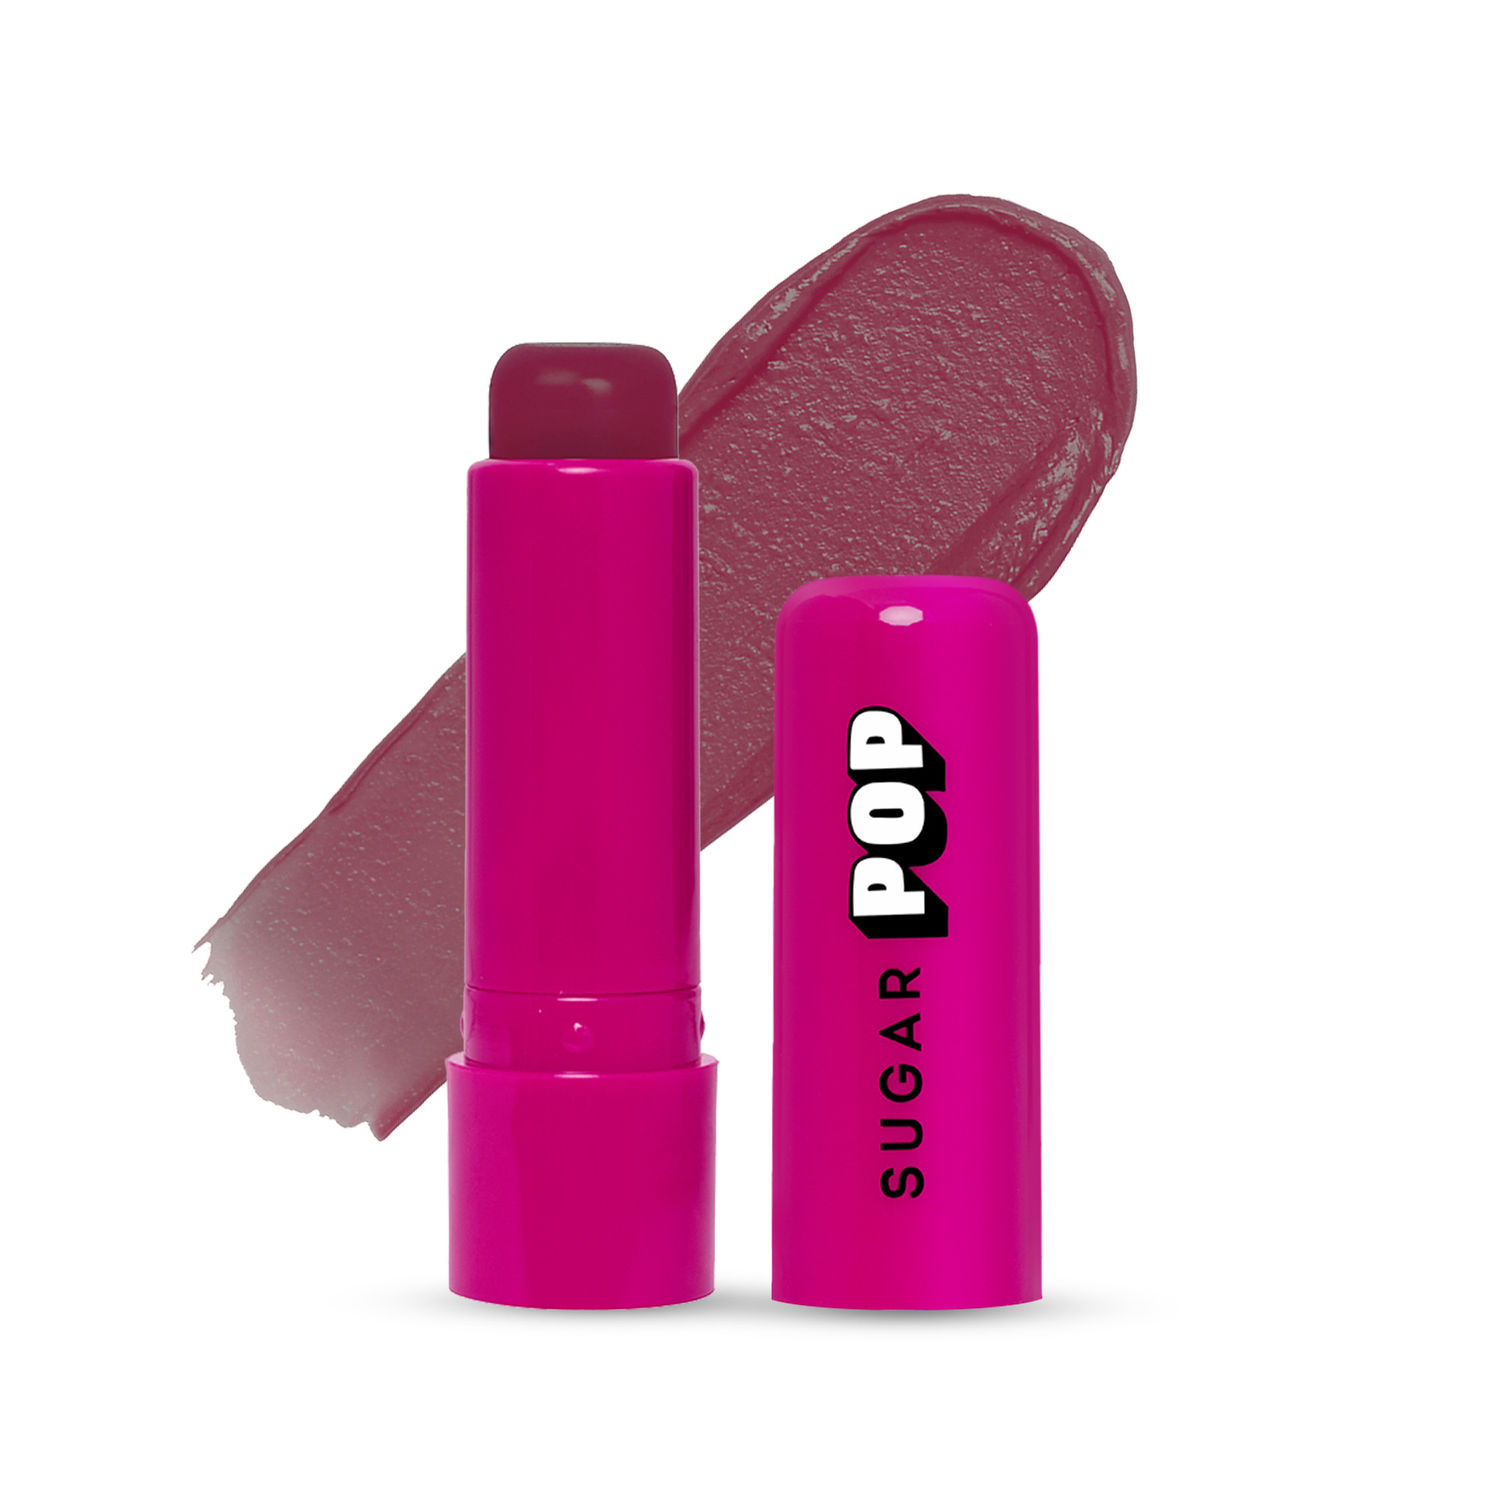 Buy SUGAR POP Nourishing Lip Balm 07 Plum - 4.5 gms – Tinted Lip Moisturizer for Dry and Chapped Lips, Enriched with Castor Oil for Ultimate Lip Care, Intense Hydration and UV protection l SPF Infused Lip Care for Women - Purplle